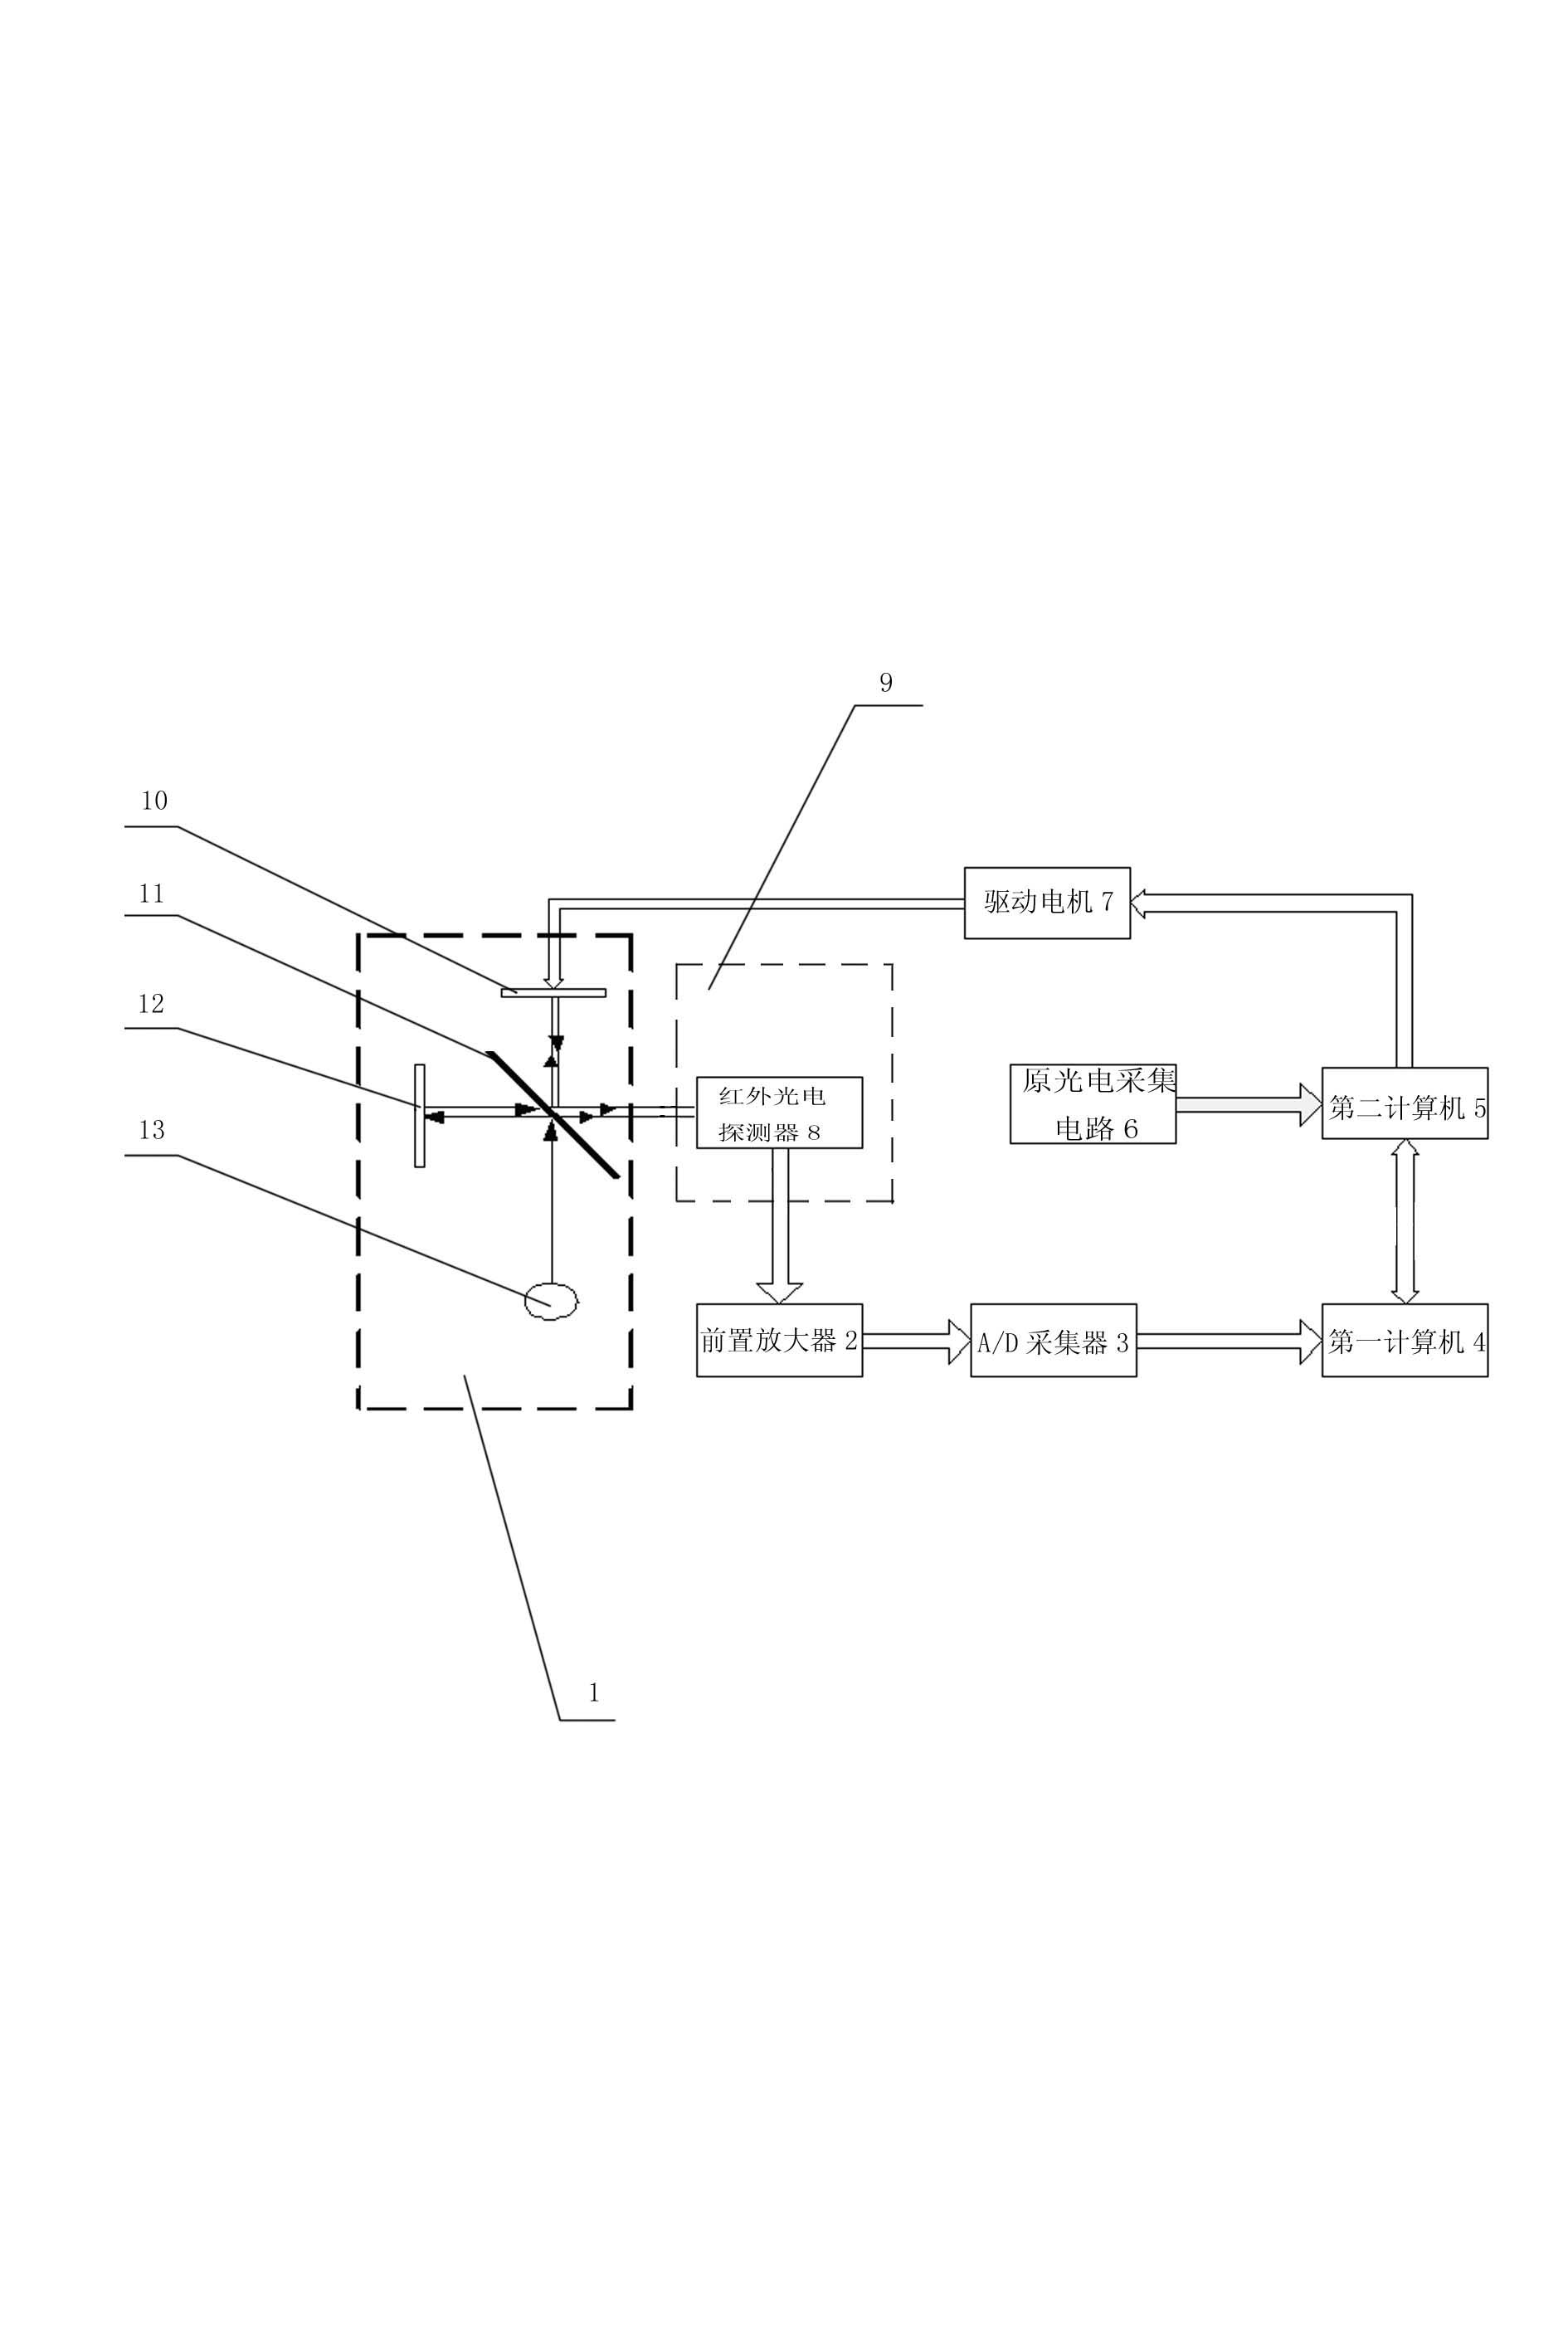 Device for measuring spectral responsivity of infrared photoelectric detector